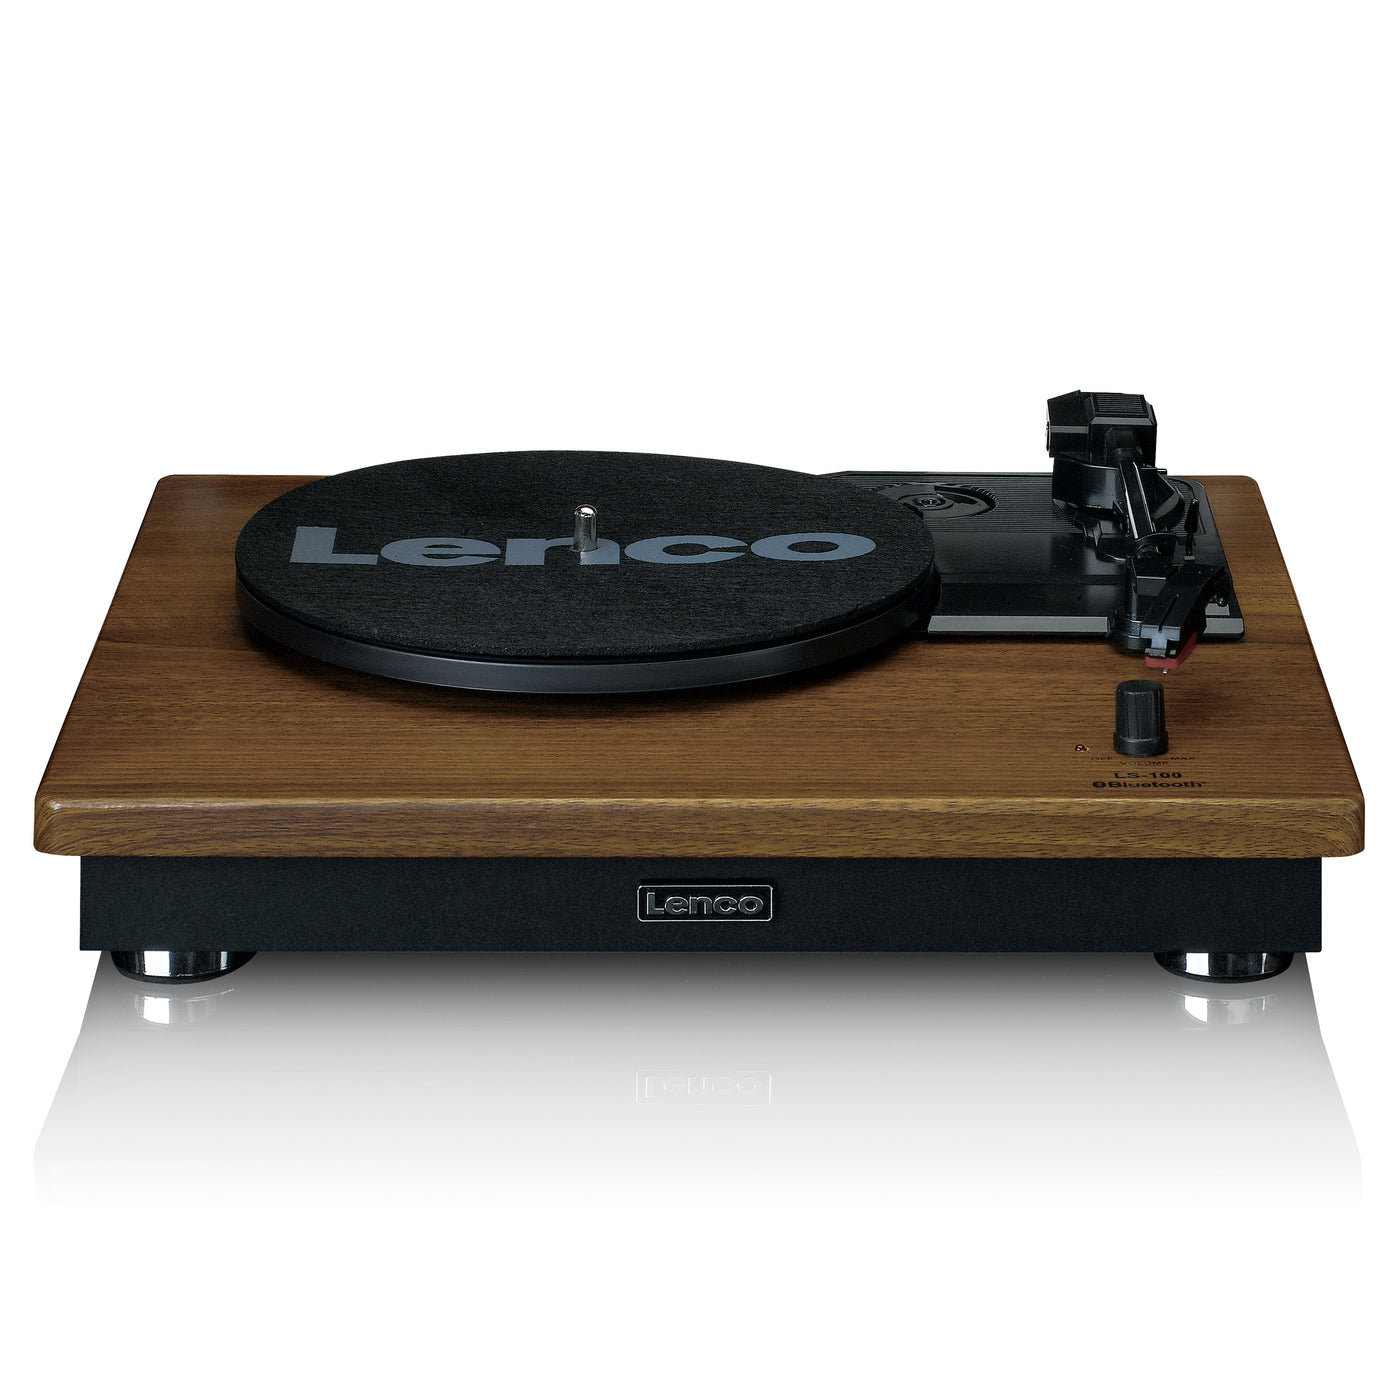 LENCO LS-100WD - Record Player with 2 external speakers - Wood